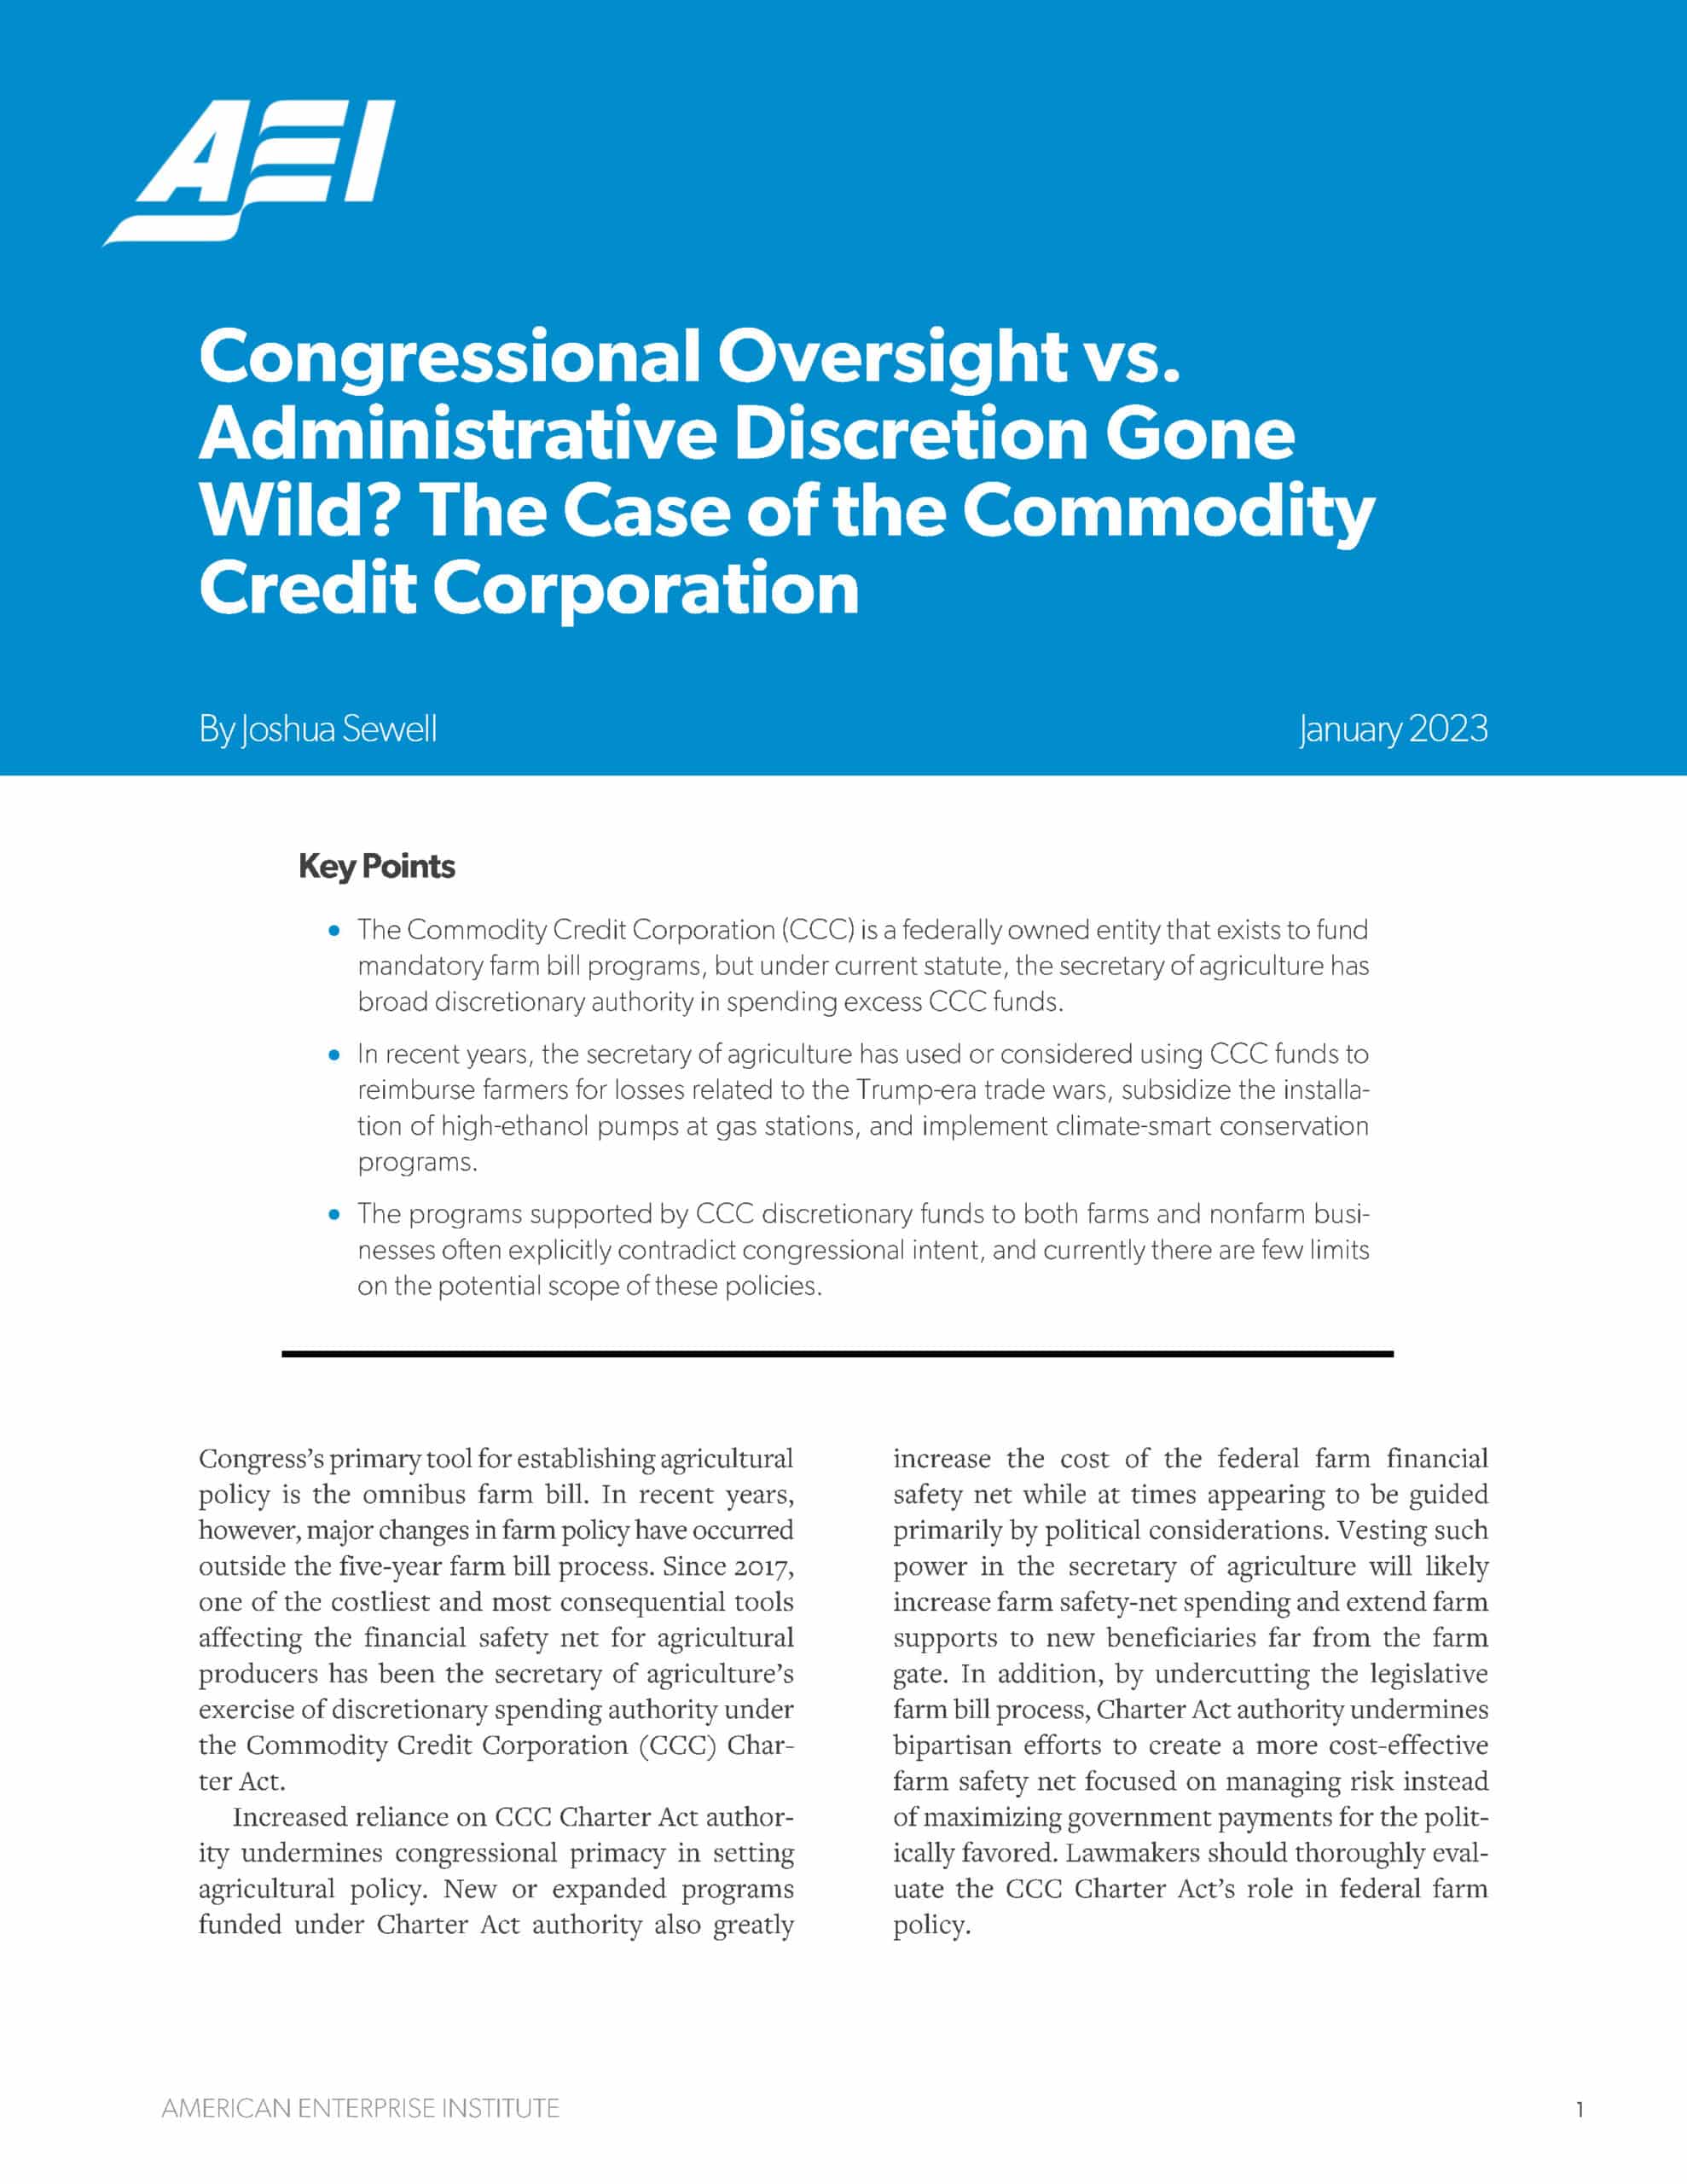 Congressional Oversight vs. Administrative Discretion Gone Wild? The Case of the Commodity Credit Corporation